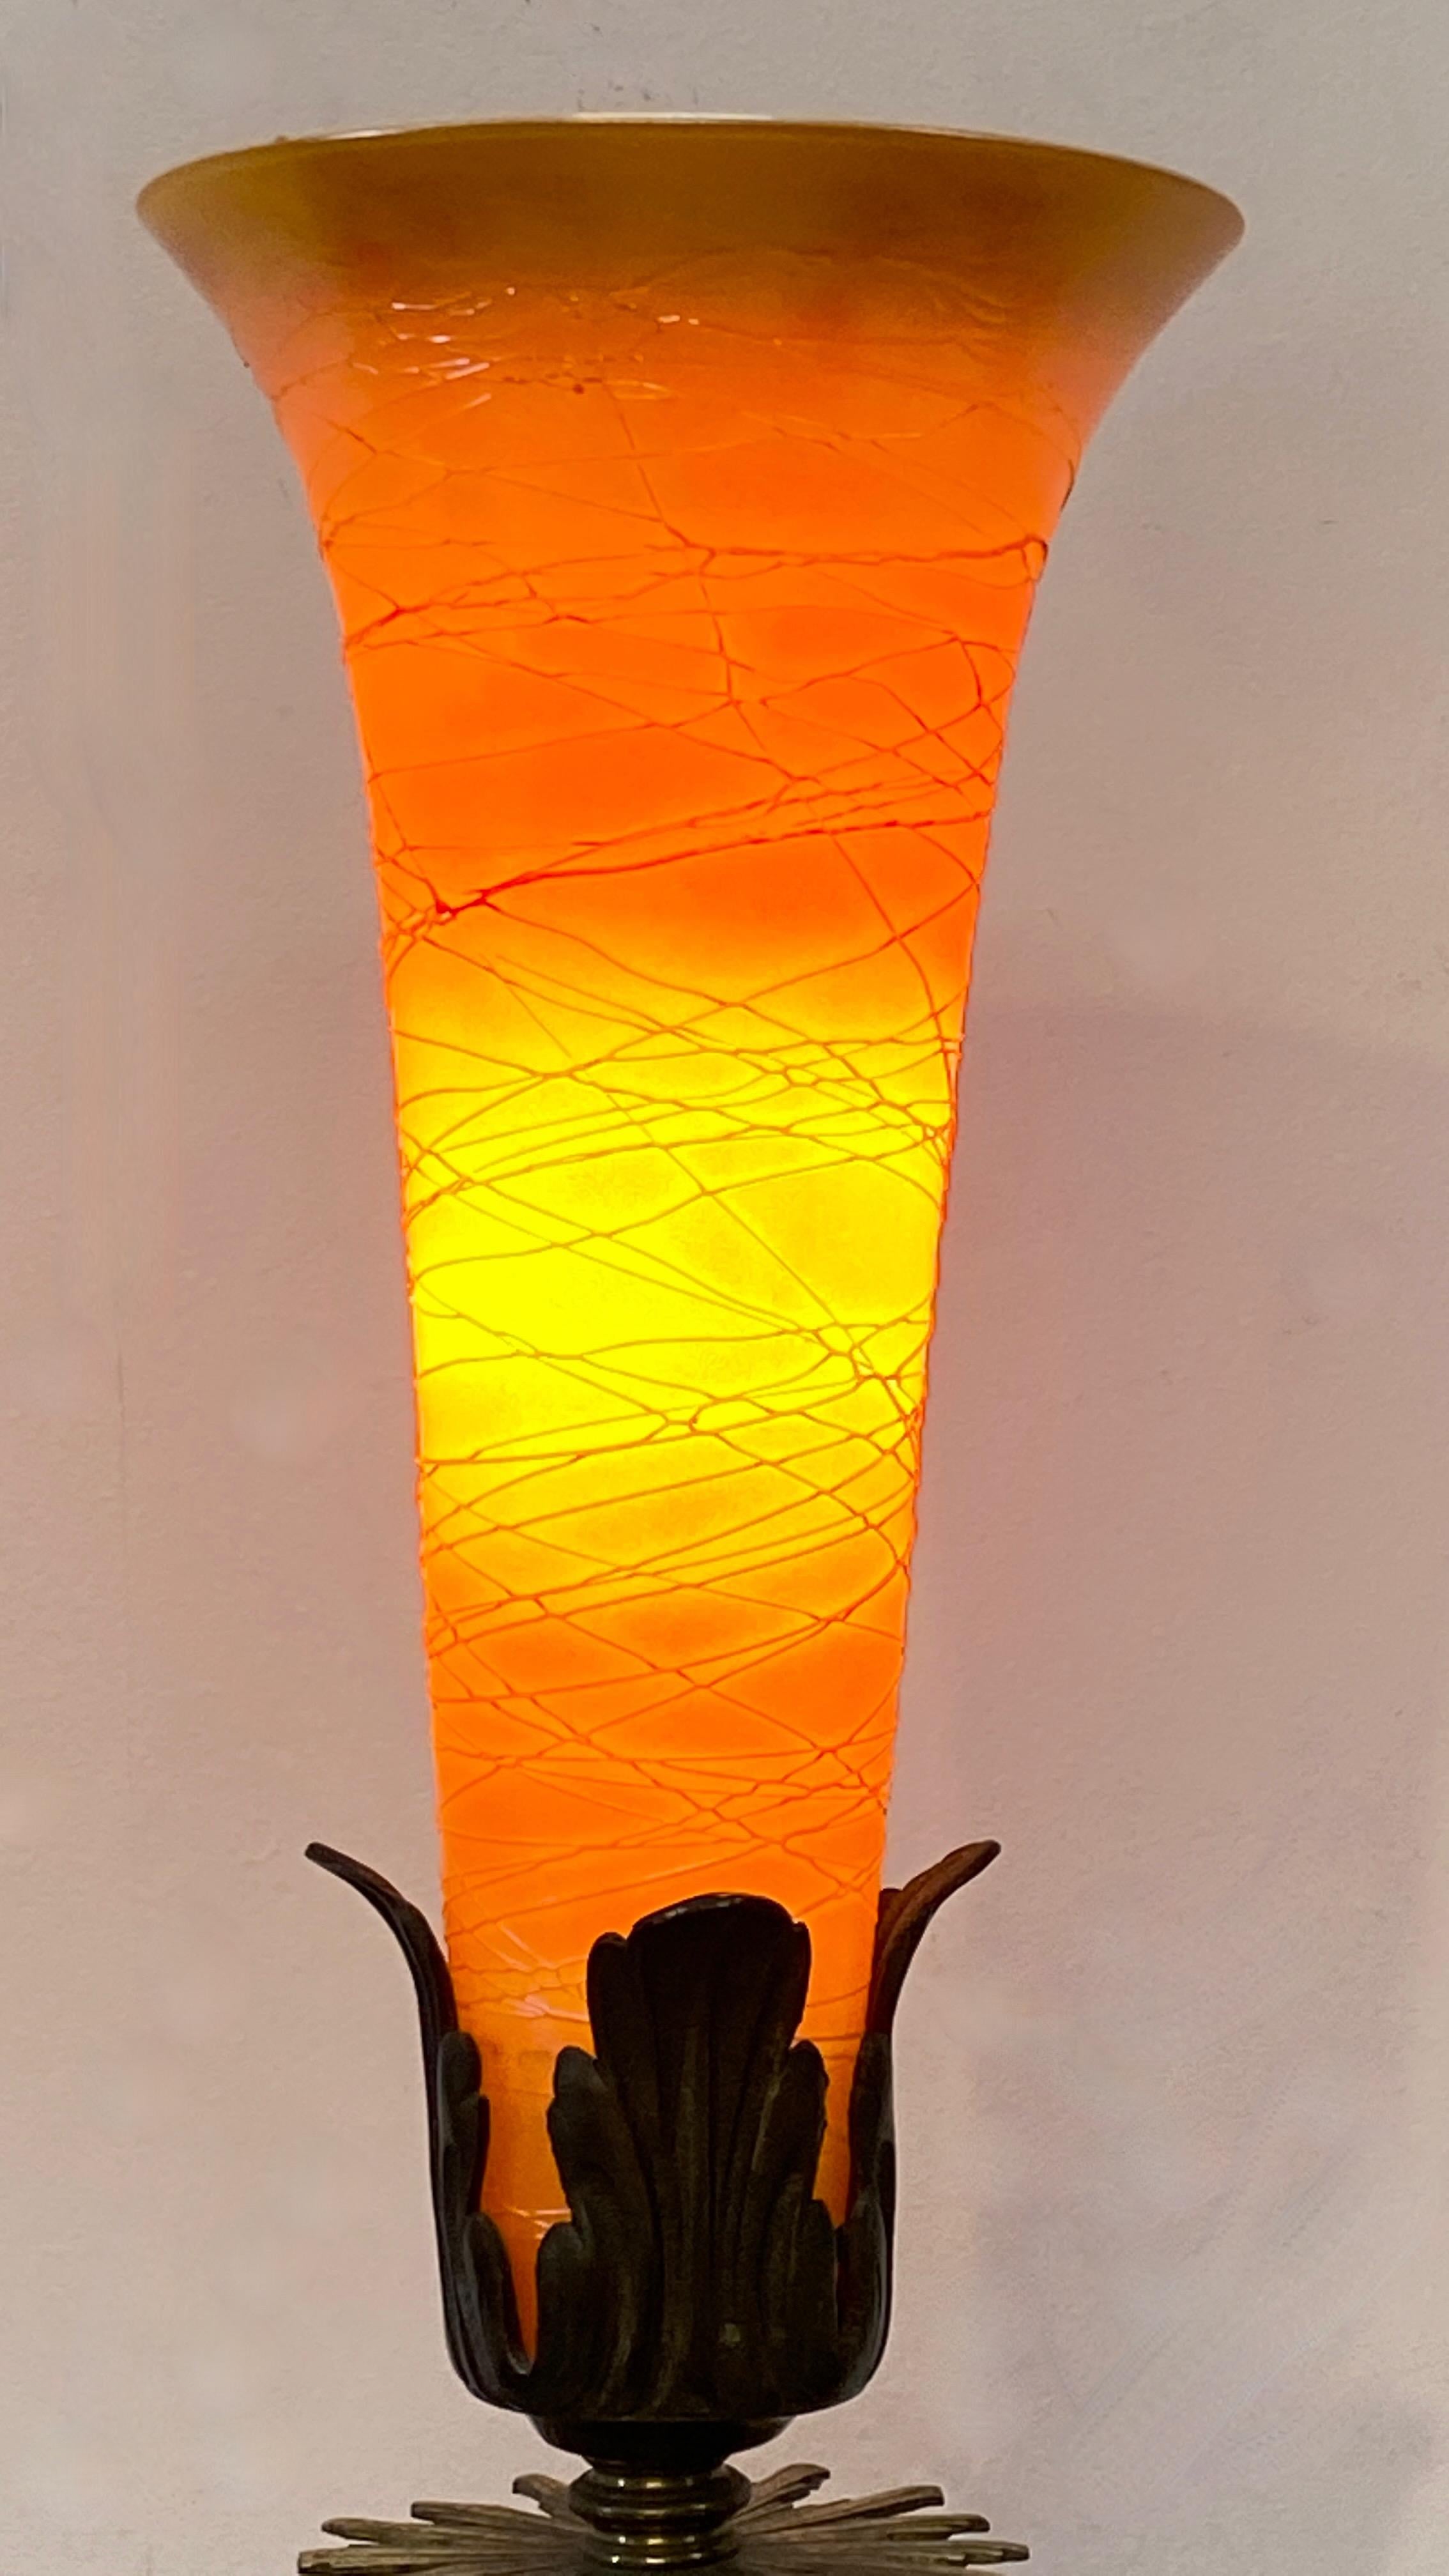 American Art Deco Period Floor Lamp with Durand Art Glass Shade, 1920's For Sale 2